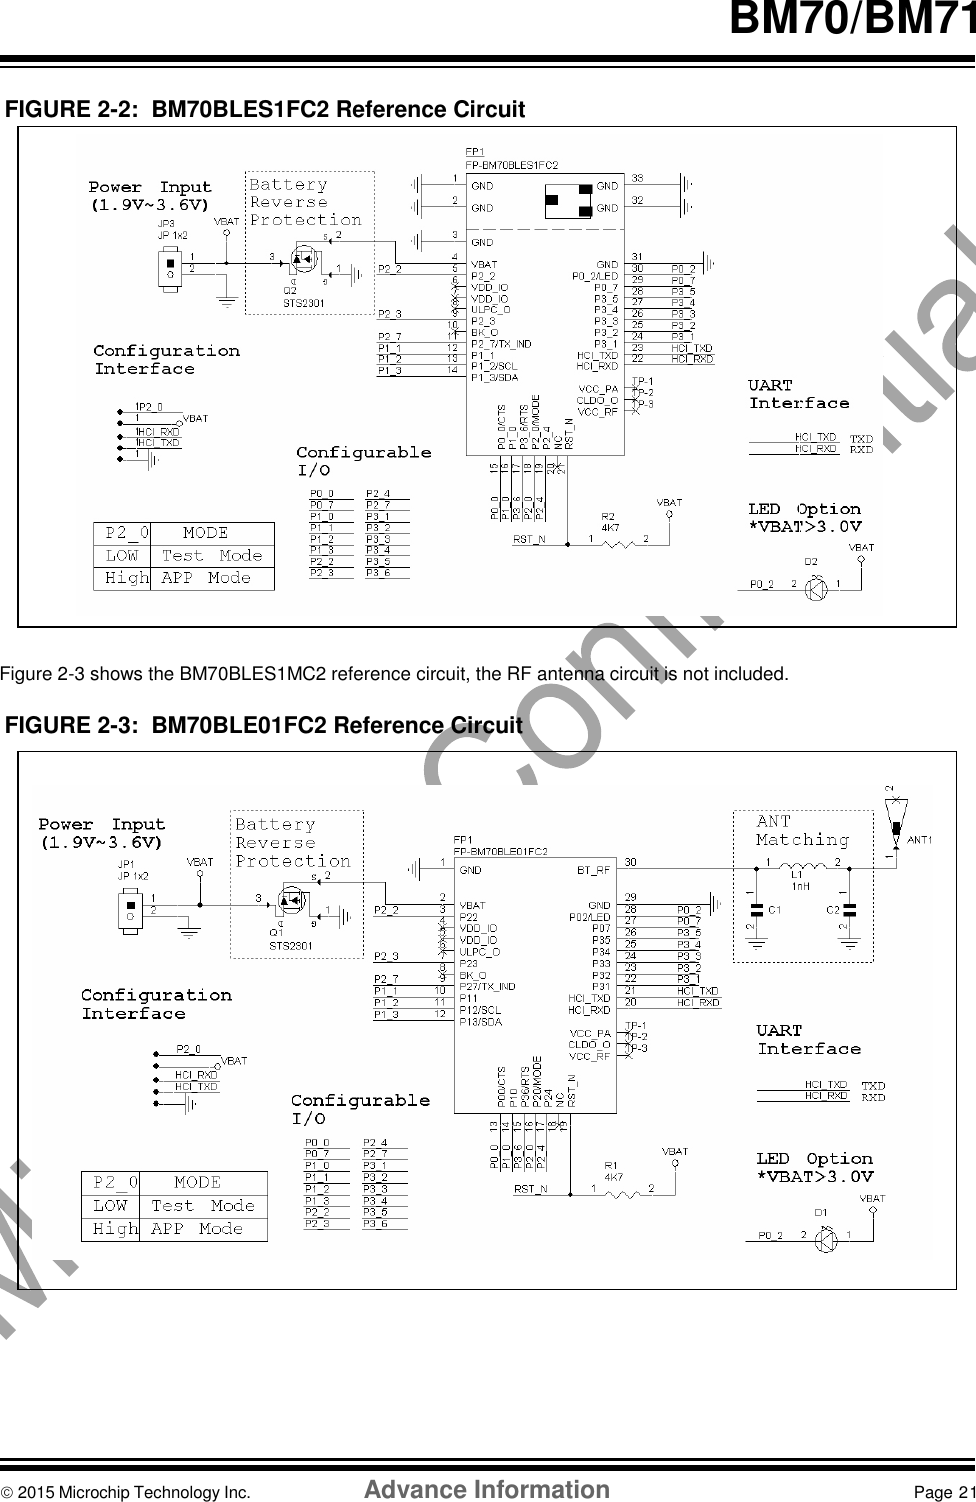    BM70/BM71   FIGURE 2-2:  BM70BLES1FC2 Reference Circuit                     Figure 2-3 shows the BM70BLES1MC2 reference circuit, the RF antenna circuit is not included.  FIGURE 2-3:  BM70BLE01FC2 Reference Circuit                          2015 Microchip Technology Inc.  Advance Information  Page 21    